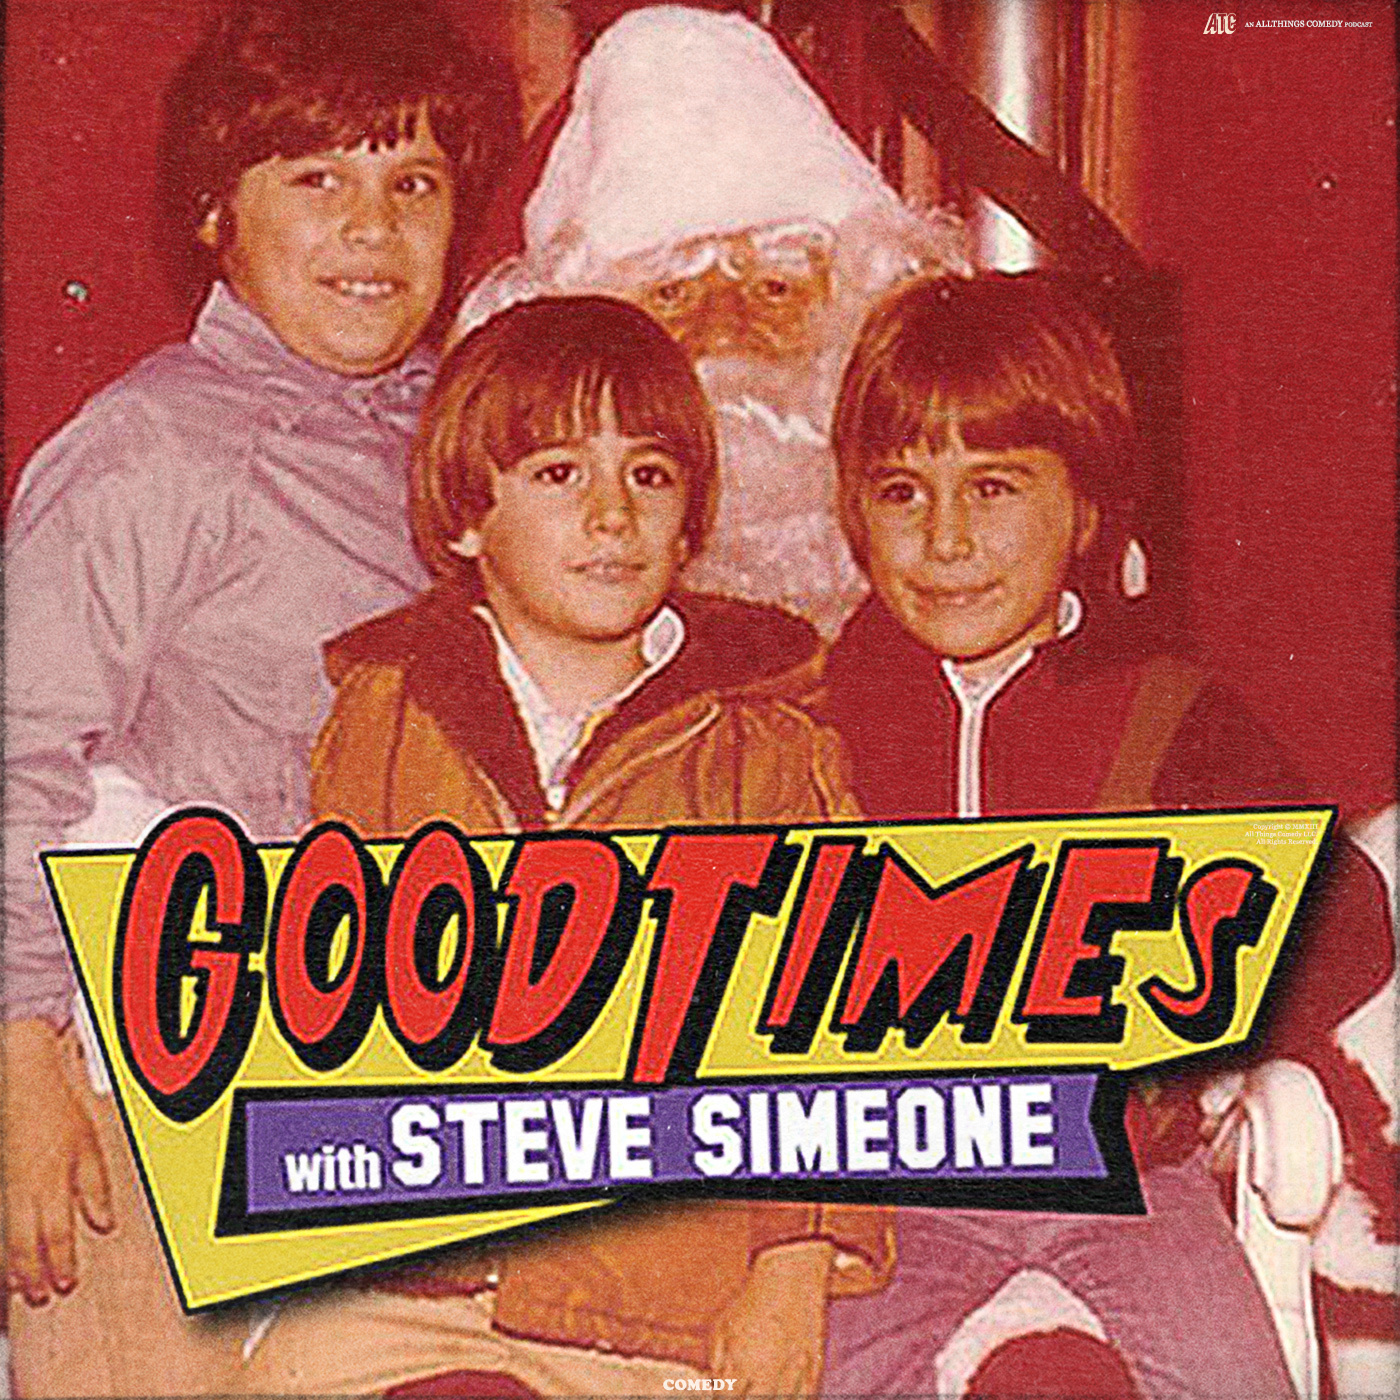 #187 - Turner Sparks - Good Times with: Steve Simeone